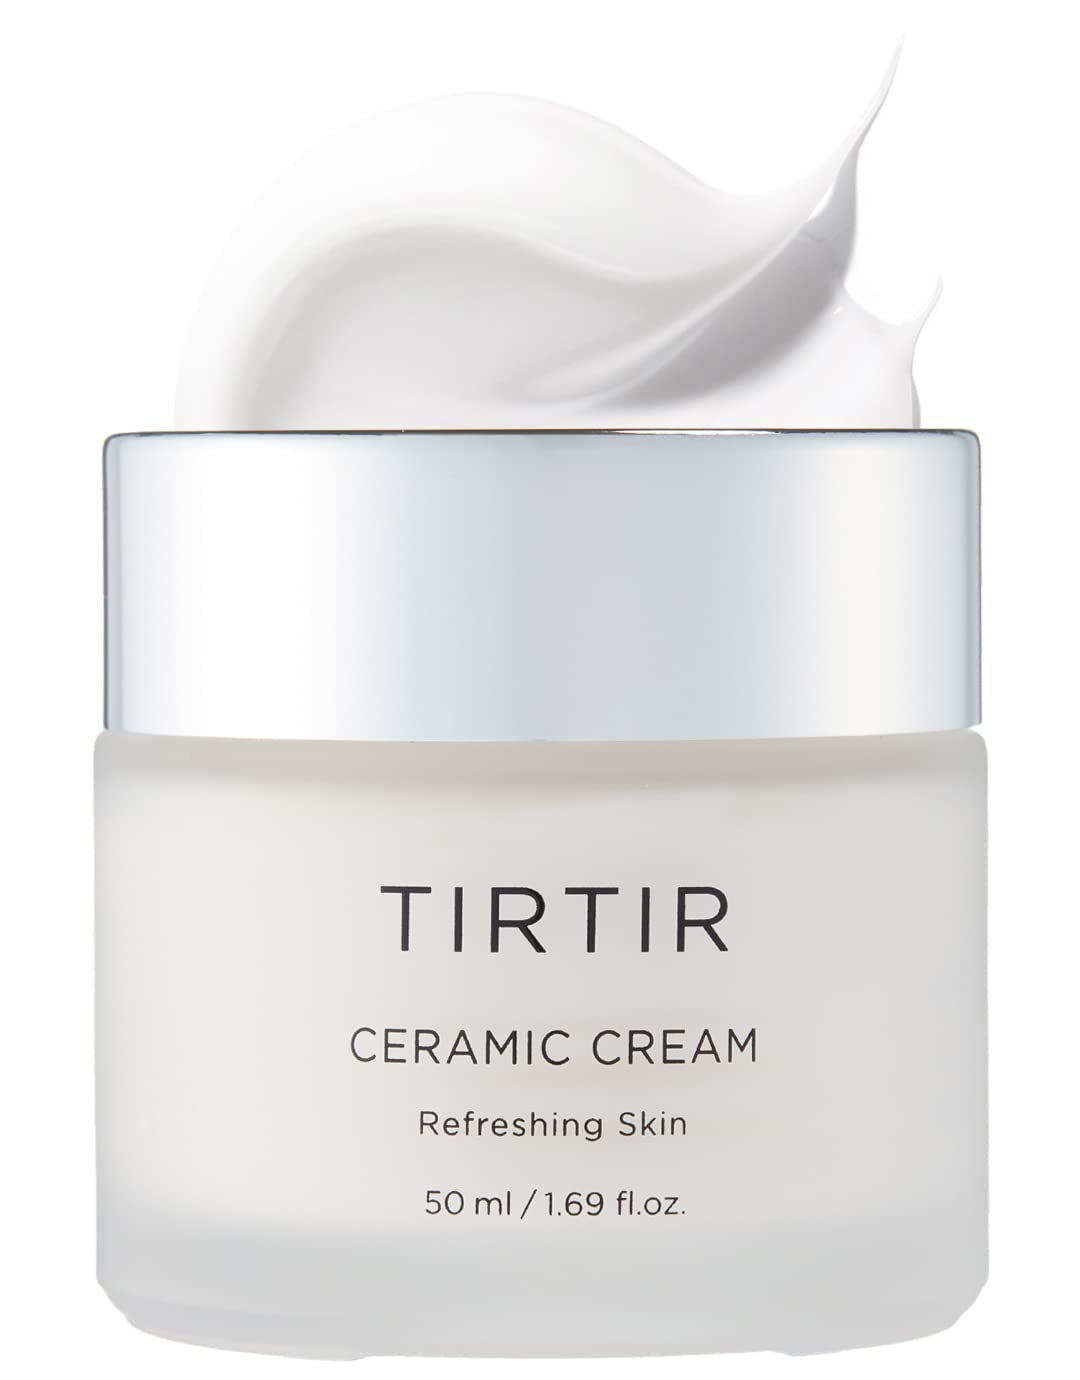 "Ultimate Hydration and Radiance: TIRTIR Natural Ceramide Cream Moisturizer with Shea Butter and Centella Asiatica Extract - Your Solution for Dry Skin (50ml / 1.69 fl.oz.)"